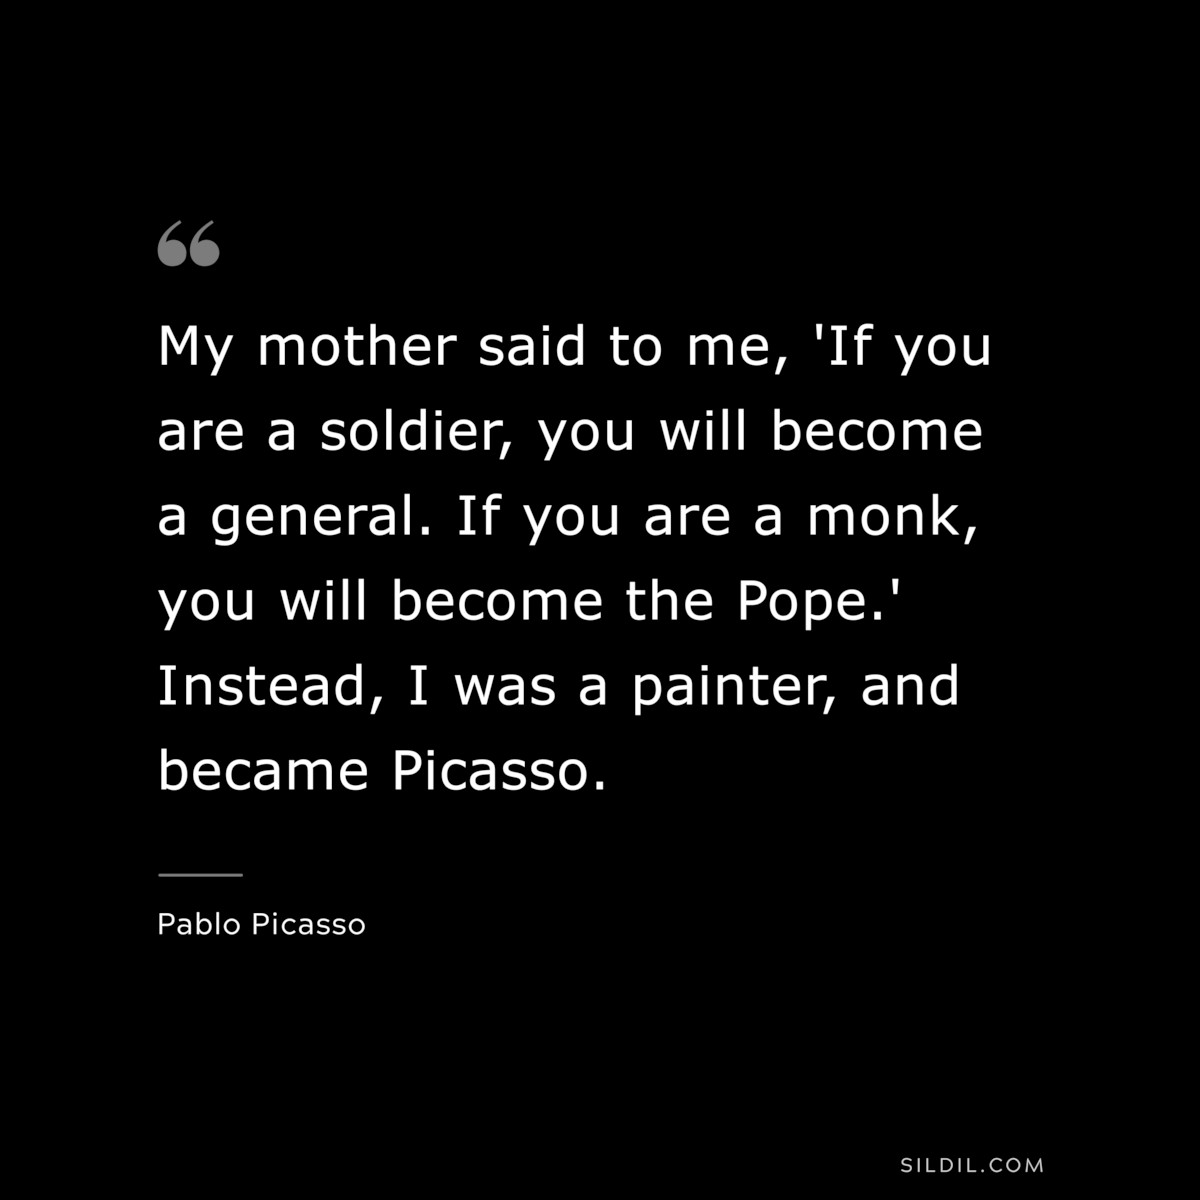 My mother said to me, 'If you are a soldier, you will become a general. If you are a monk, you will become the Pope.' Instead, I was a painter, and became Picasso. ― Pablo Picasso